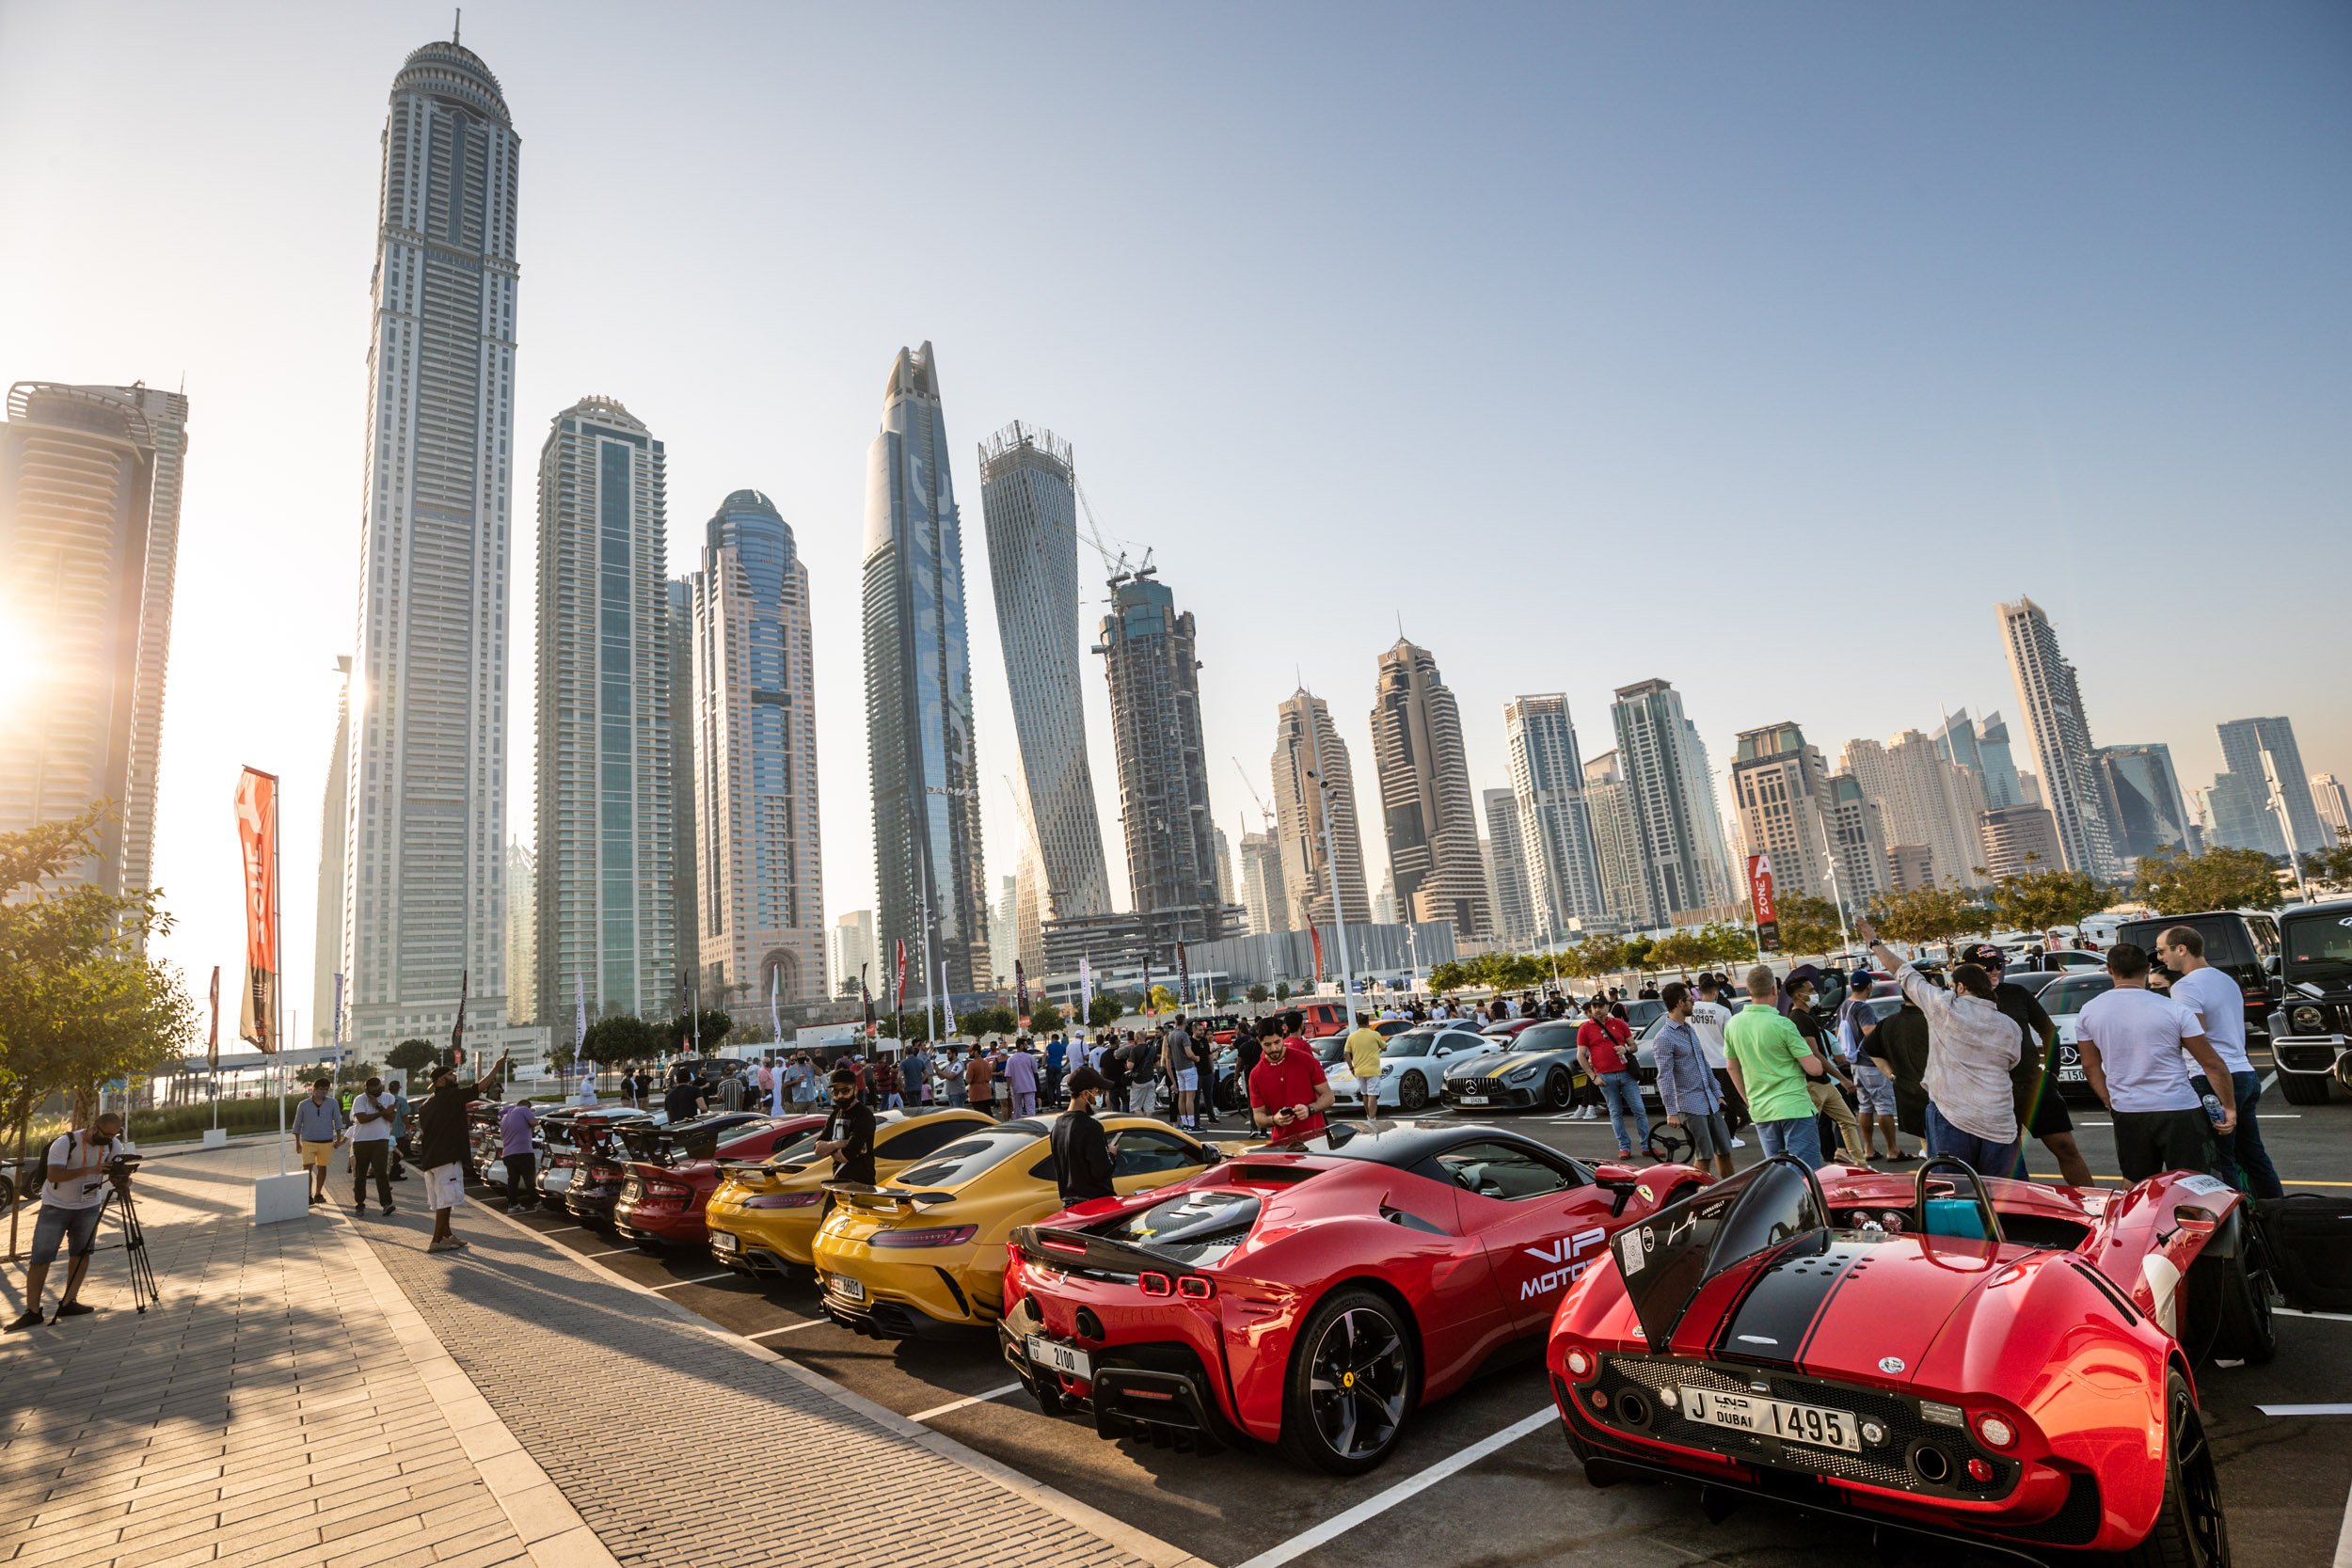 #NOFILTERDXB finale sees over 200 supercars and bikes cruise around Dubai